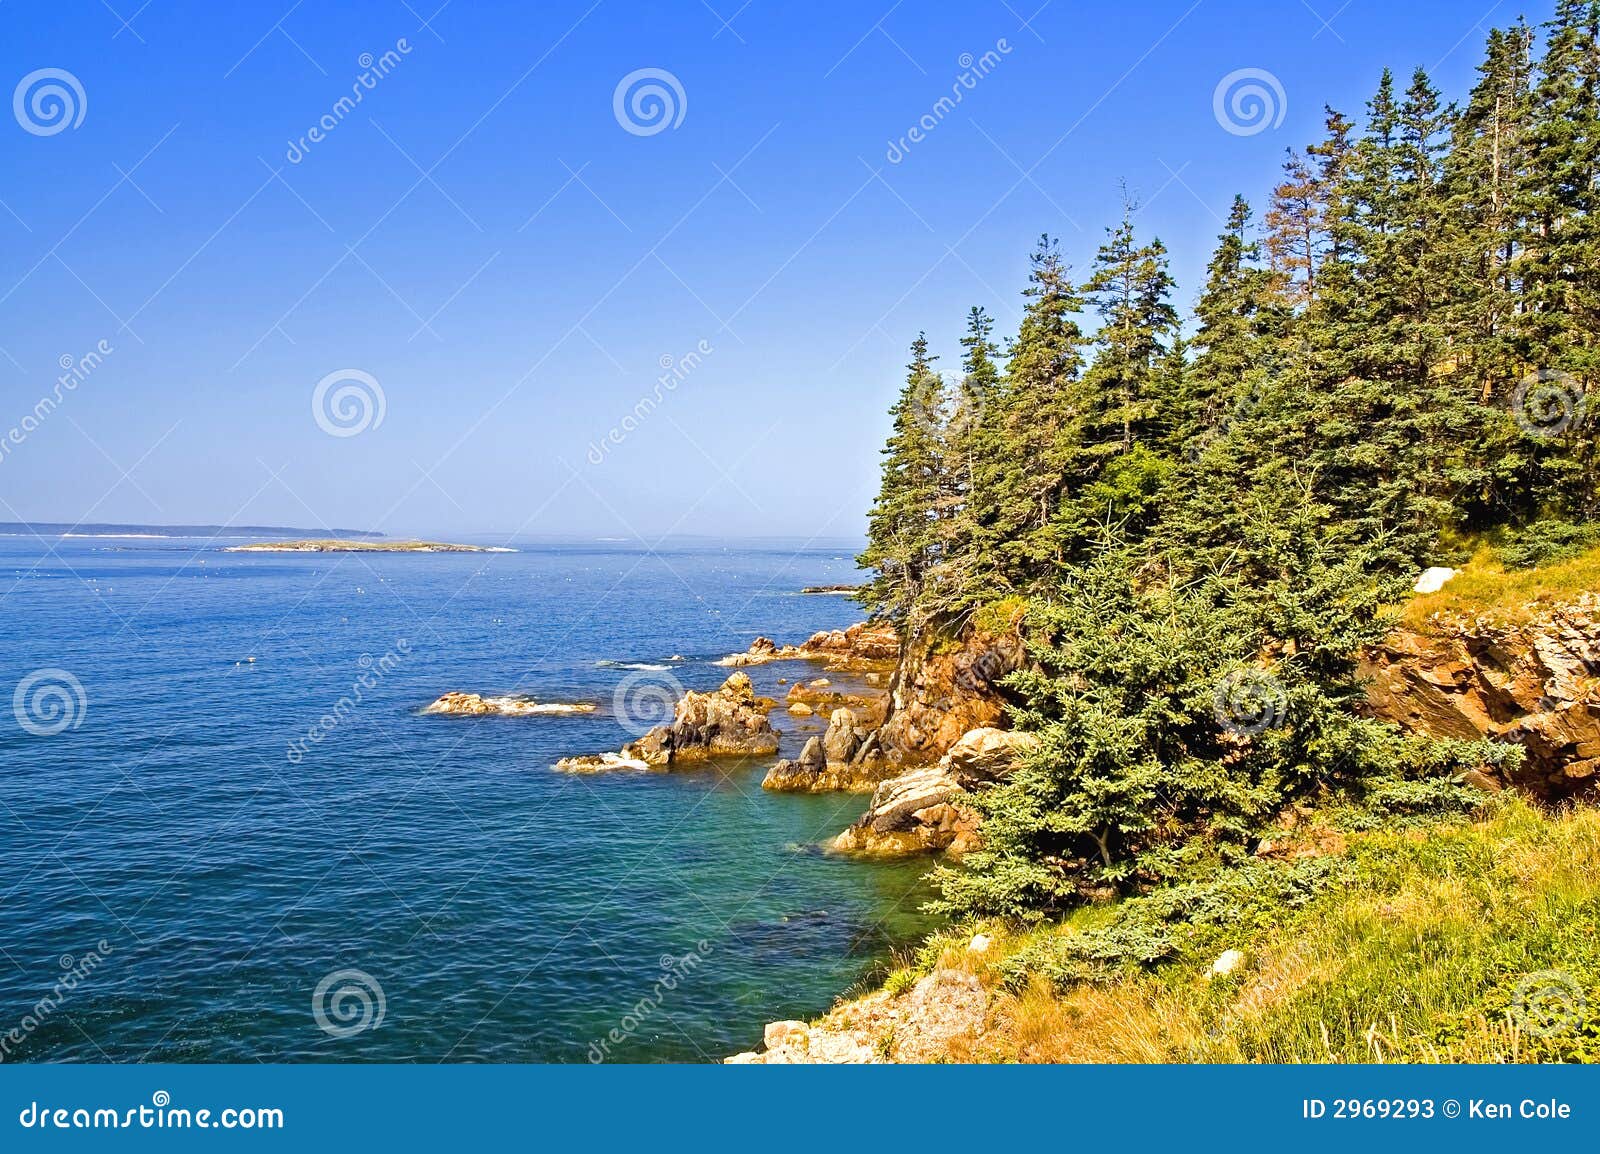 view of the beautiful rocky coastline of Maine with blue water and ...